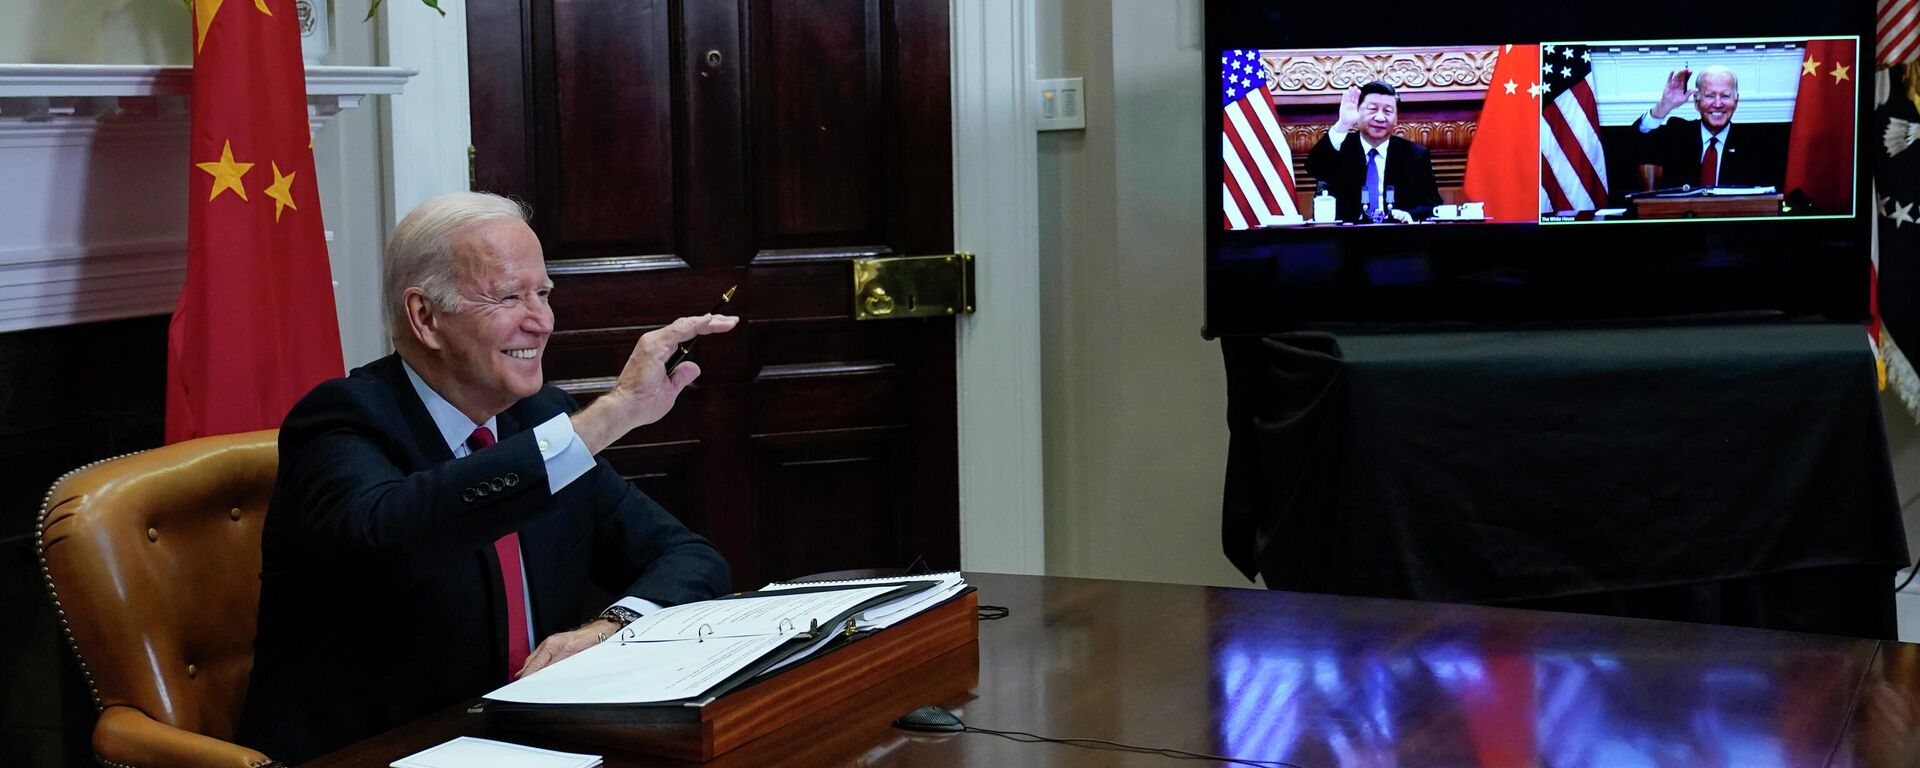 President Joe Biden waves as he meets virtually with Chinese President Xi Jinping from the Roosevelt Room of the White House in Washington, Monday, Nov. 15, 2021 - Sputnik International, 1920, 17.11.2021